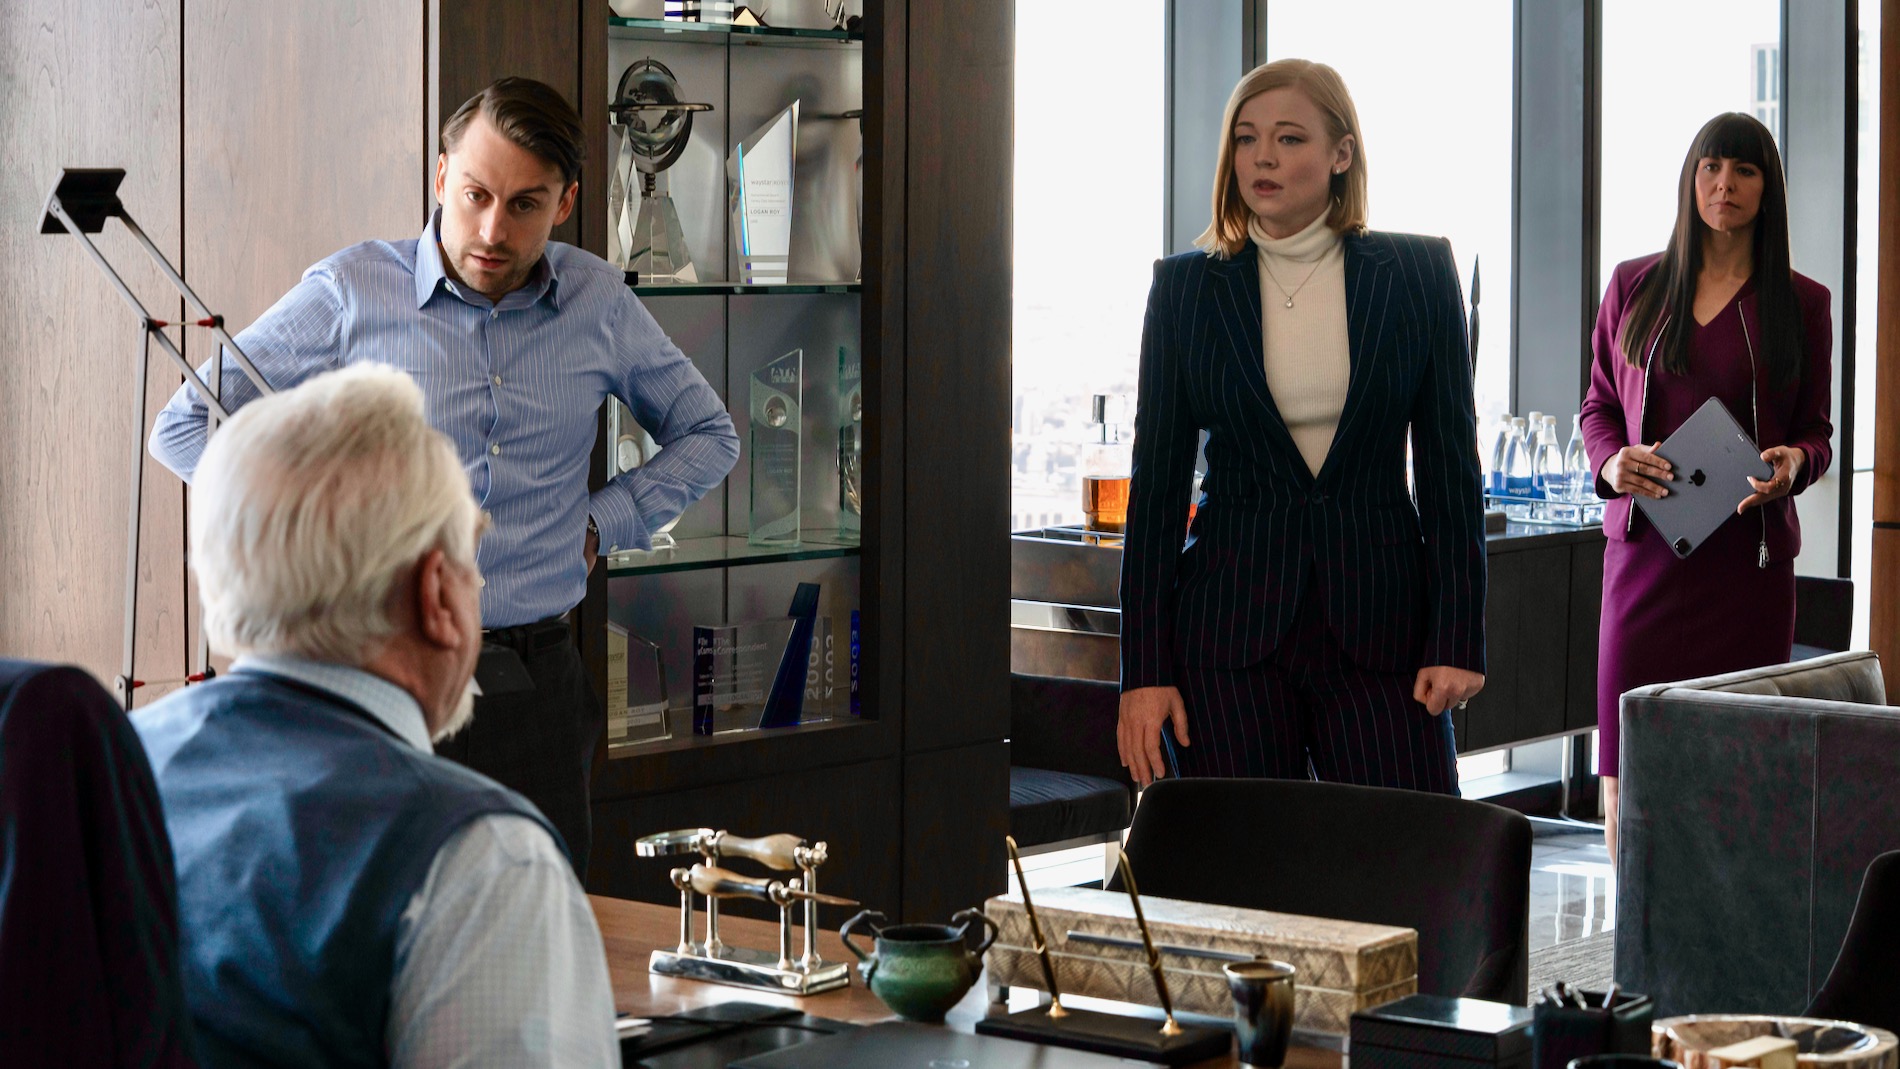 A scene in an office from the TV show "Succession" with the actors Brian Cox, Kieran Culkin, Sarah Snook, Zoë Winters